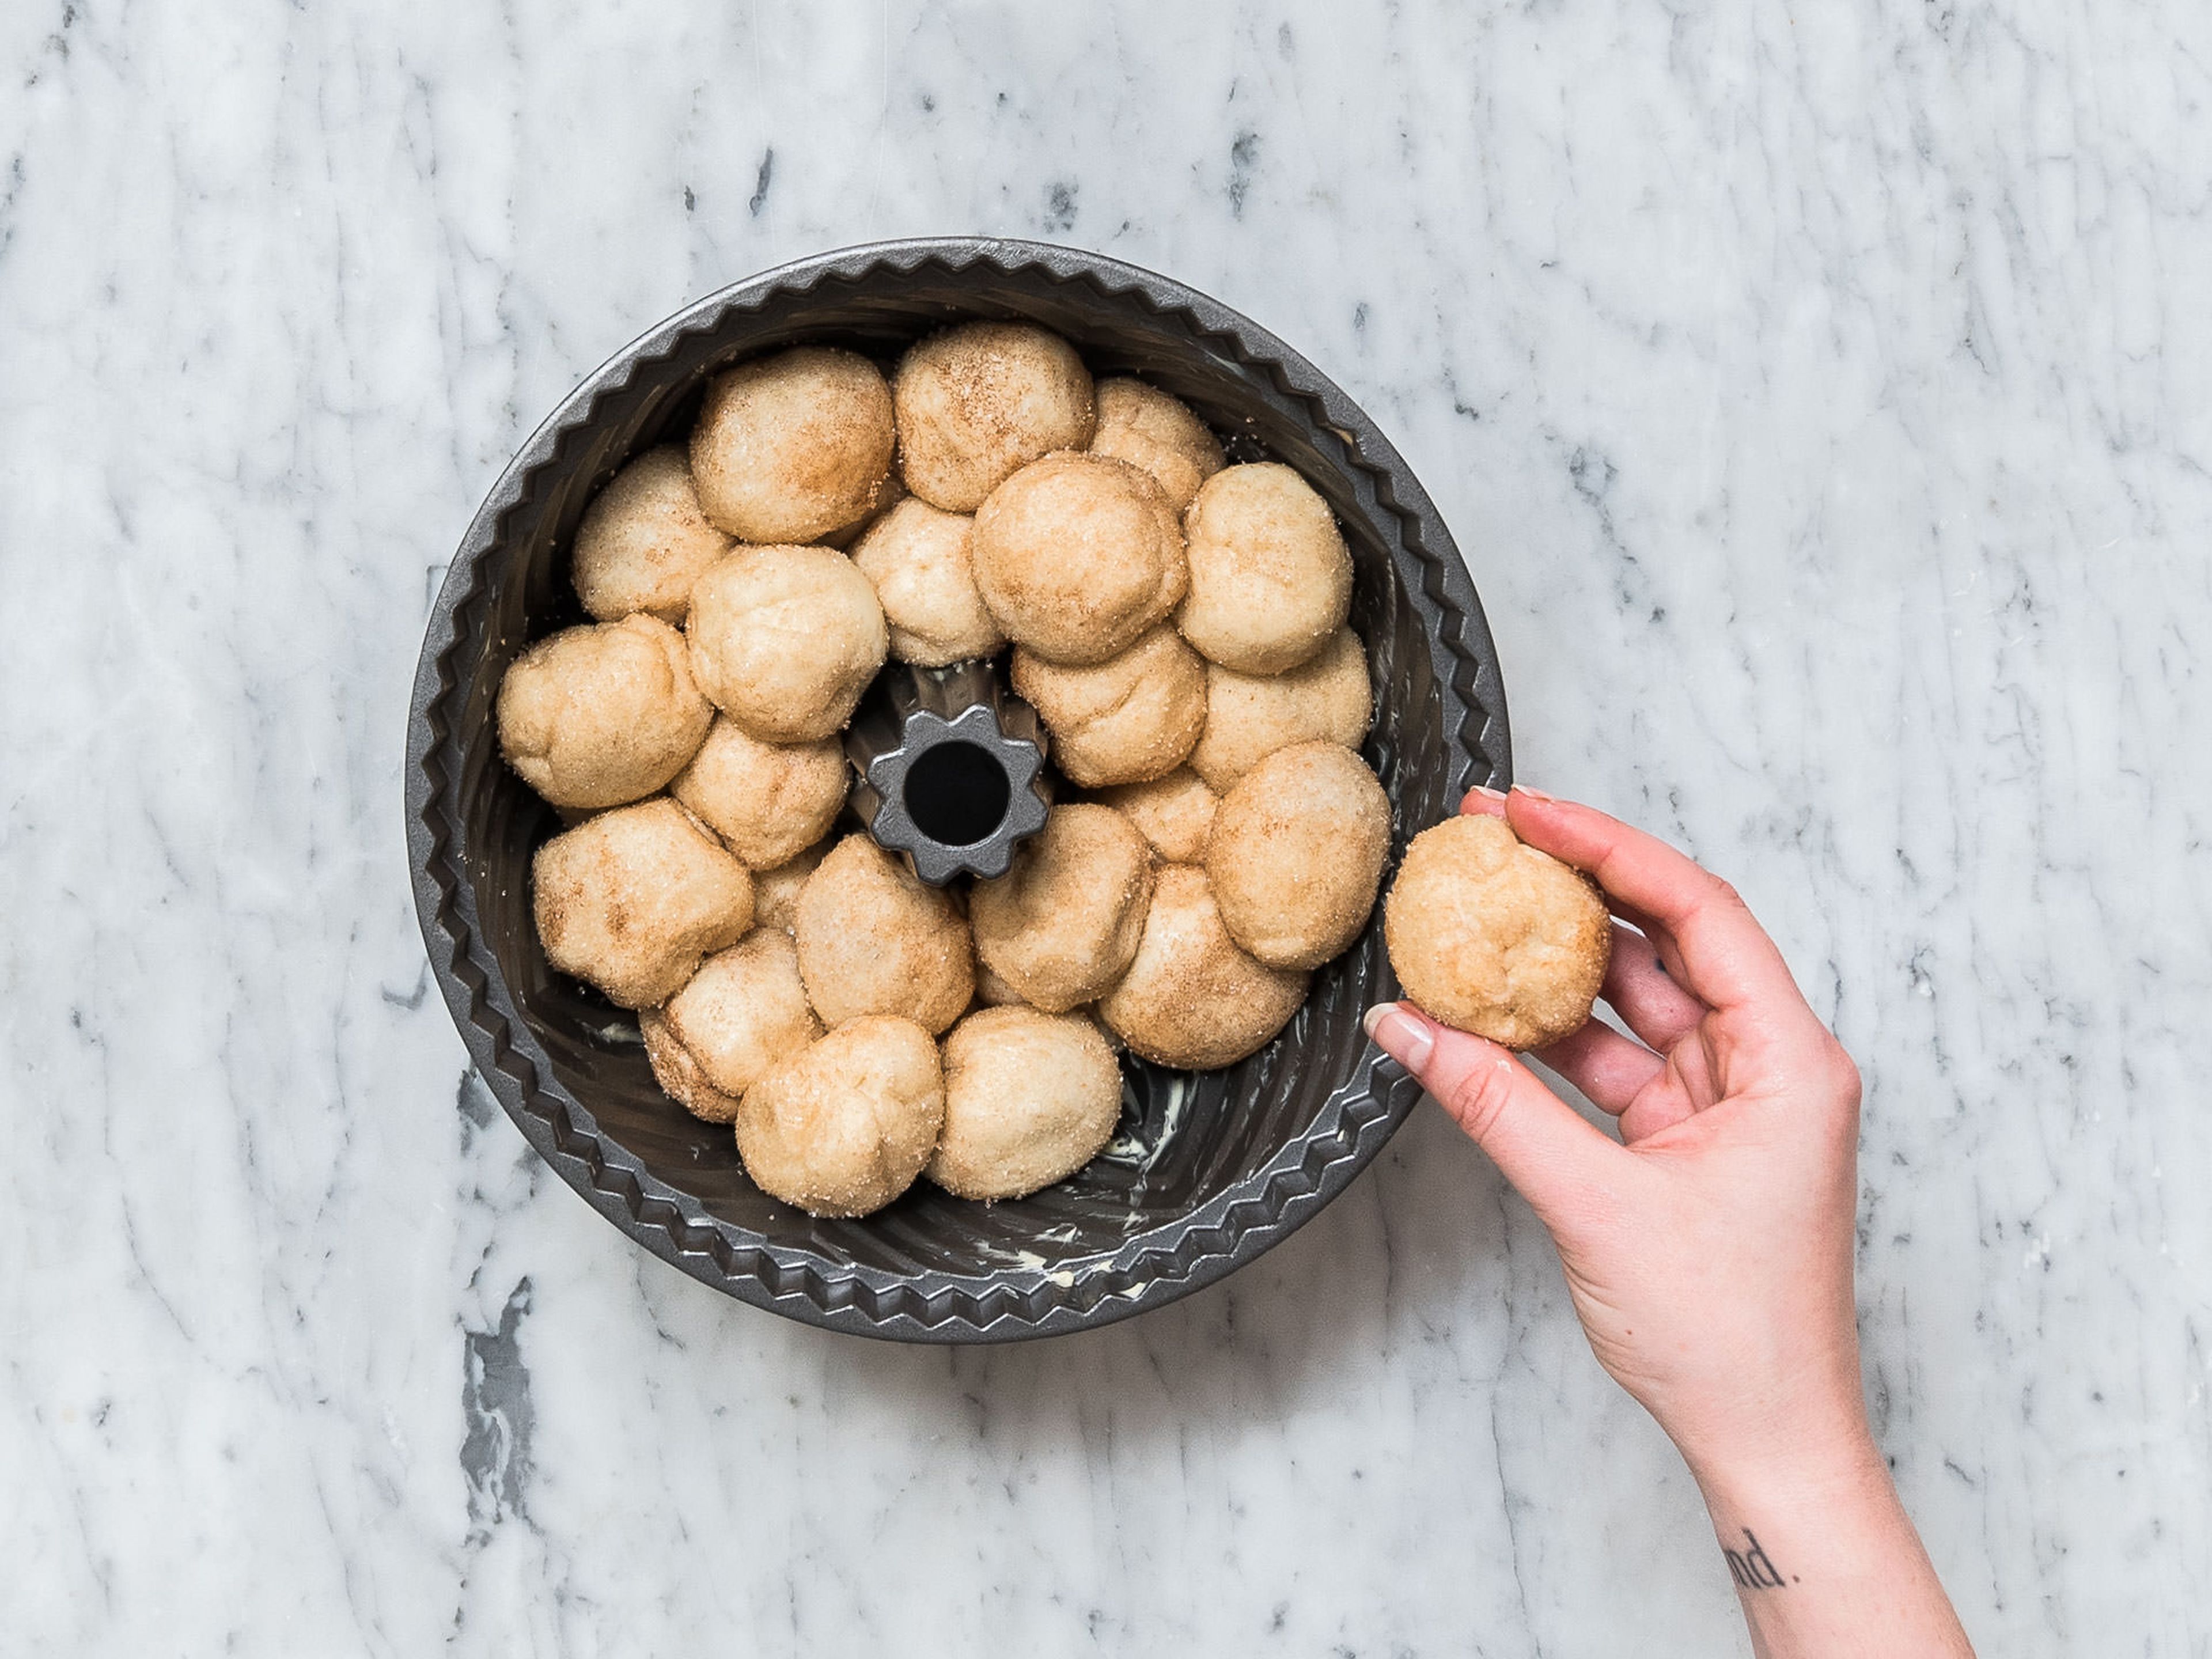 Toss the balls in the sugar-cinnamon mixture and stack into a greased bundt pan. Bake at 175°C/ 350°F for approx. 35 – 40 min. If the monkey bread gets too dark, cover with aluminum foil. After baking allow to cool for a few minutes, turn onto a plate.